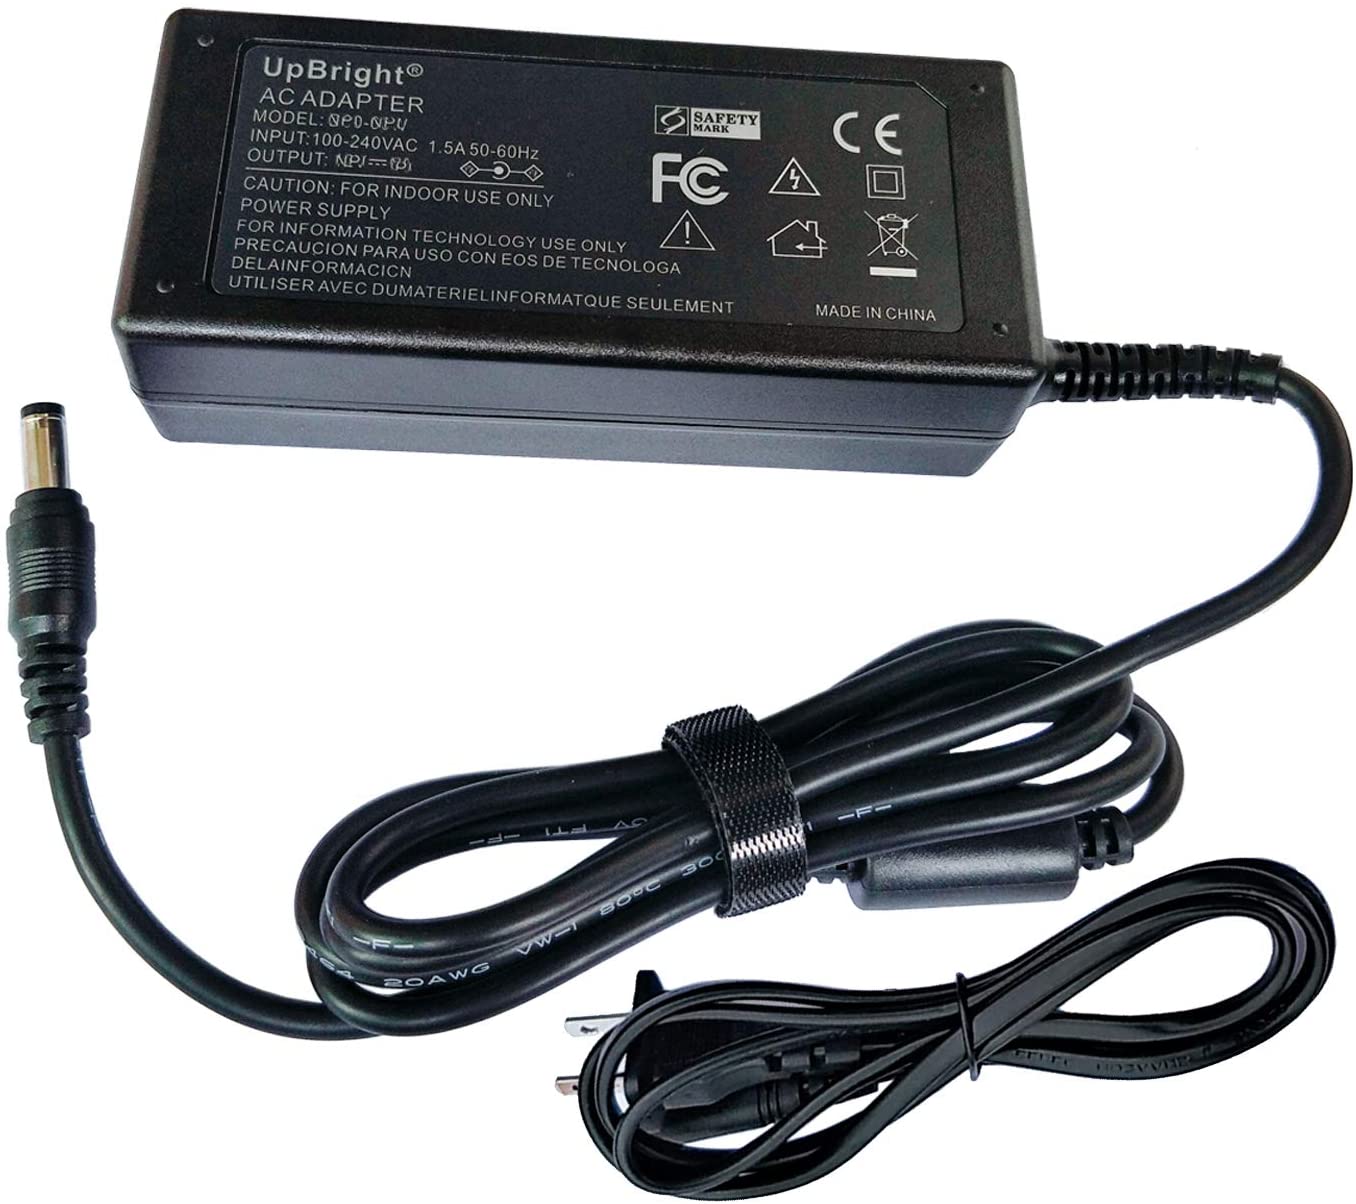 UPBRIGHT NEW Global AC / DC Adapter For LG Flatron W2230S W2230S-EF W2230S-KF W2230S-PF W2230S-PFV W2230S-NF W2230S-NFV 22" LCD 21.5" Monitor Power Supply Cord Cable PS Charger Input: 100 - 240 VAC Wo - image 1 of 5